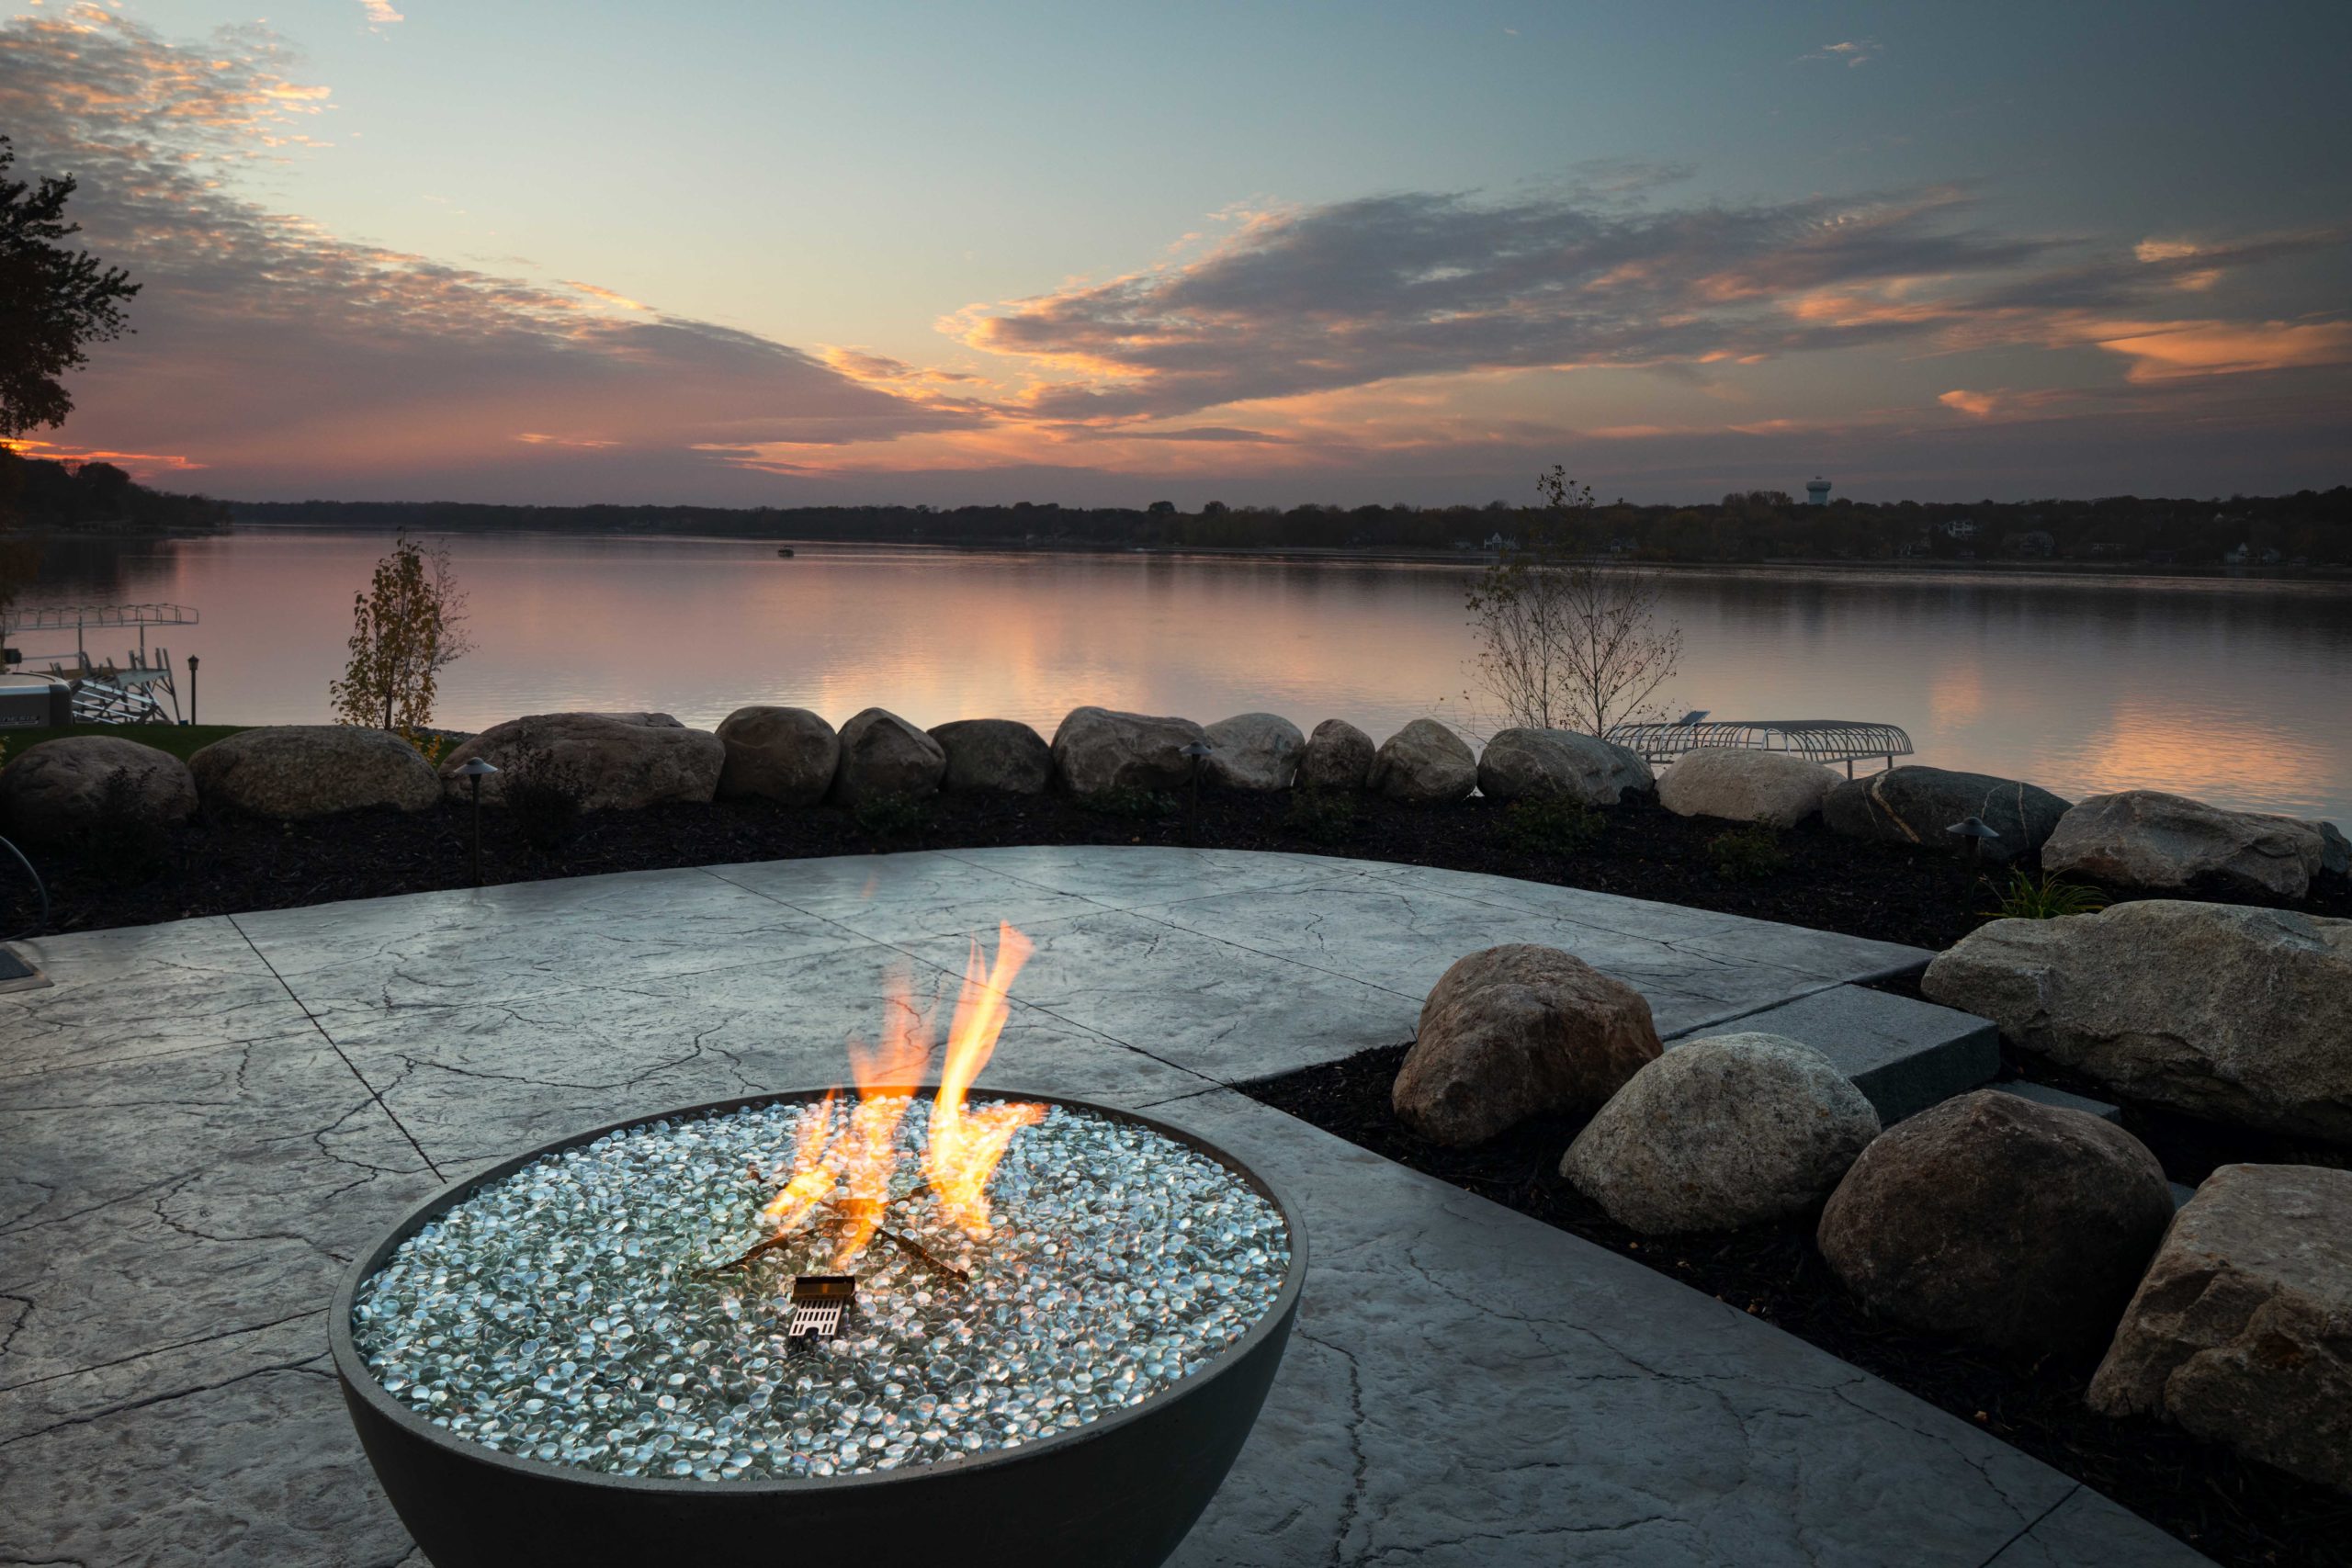 firepit on patio looking out over the lake at sunset